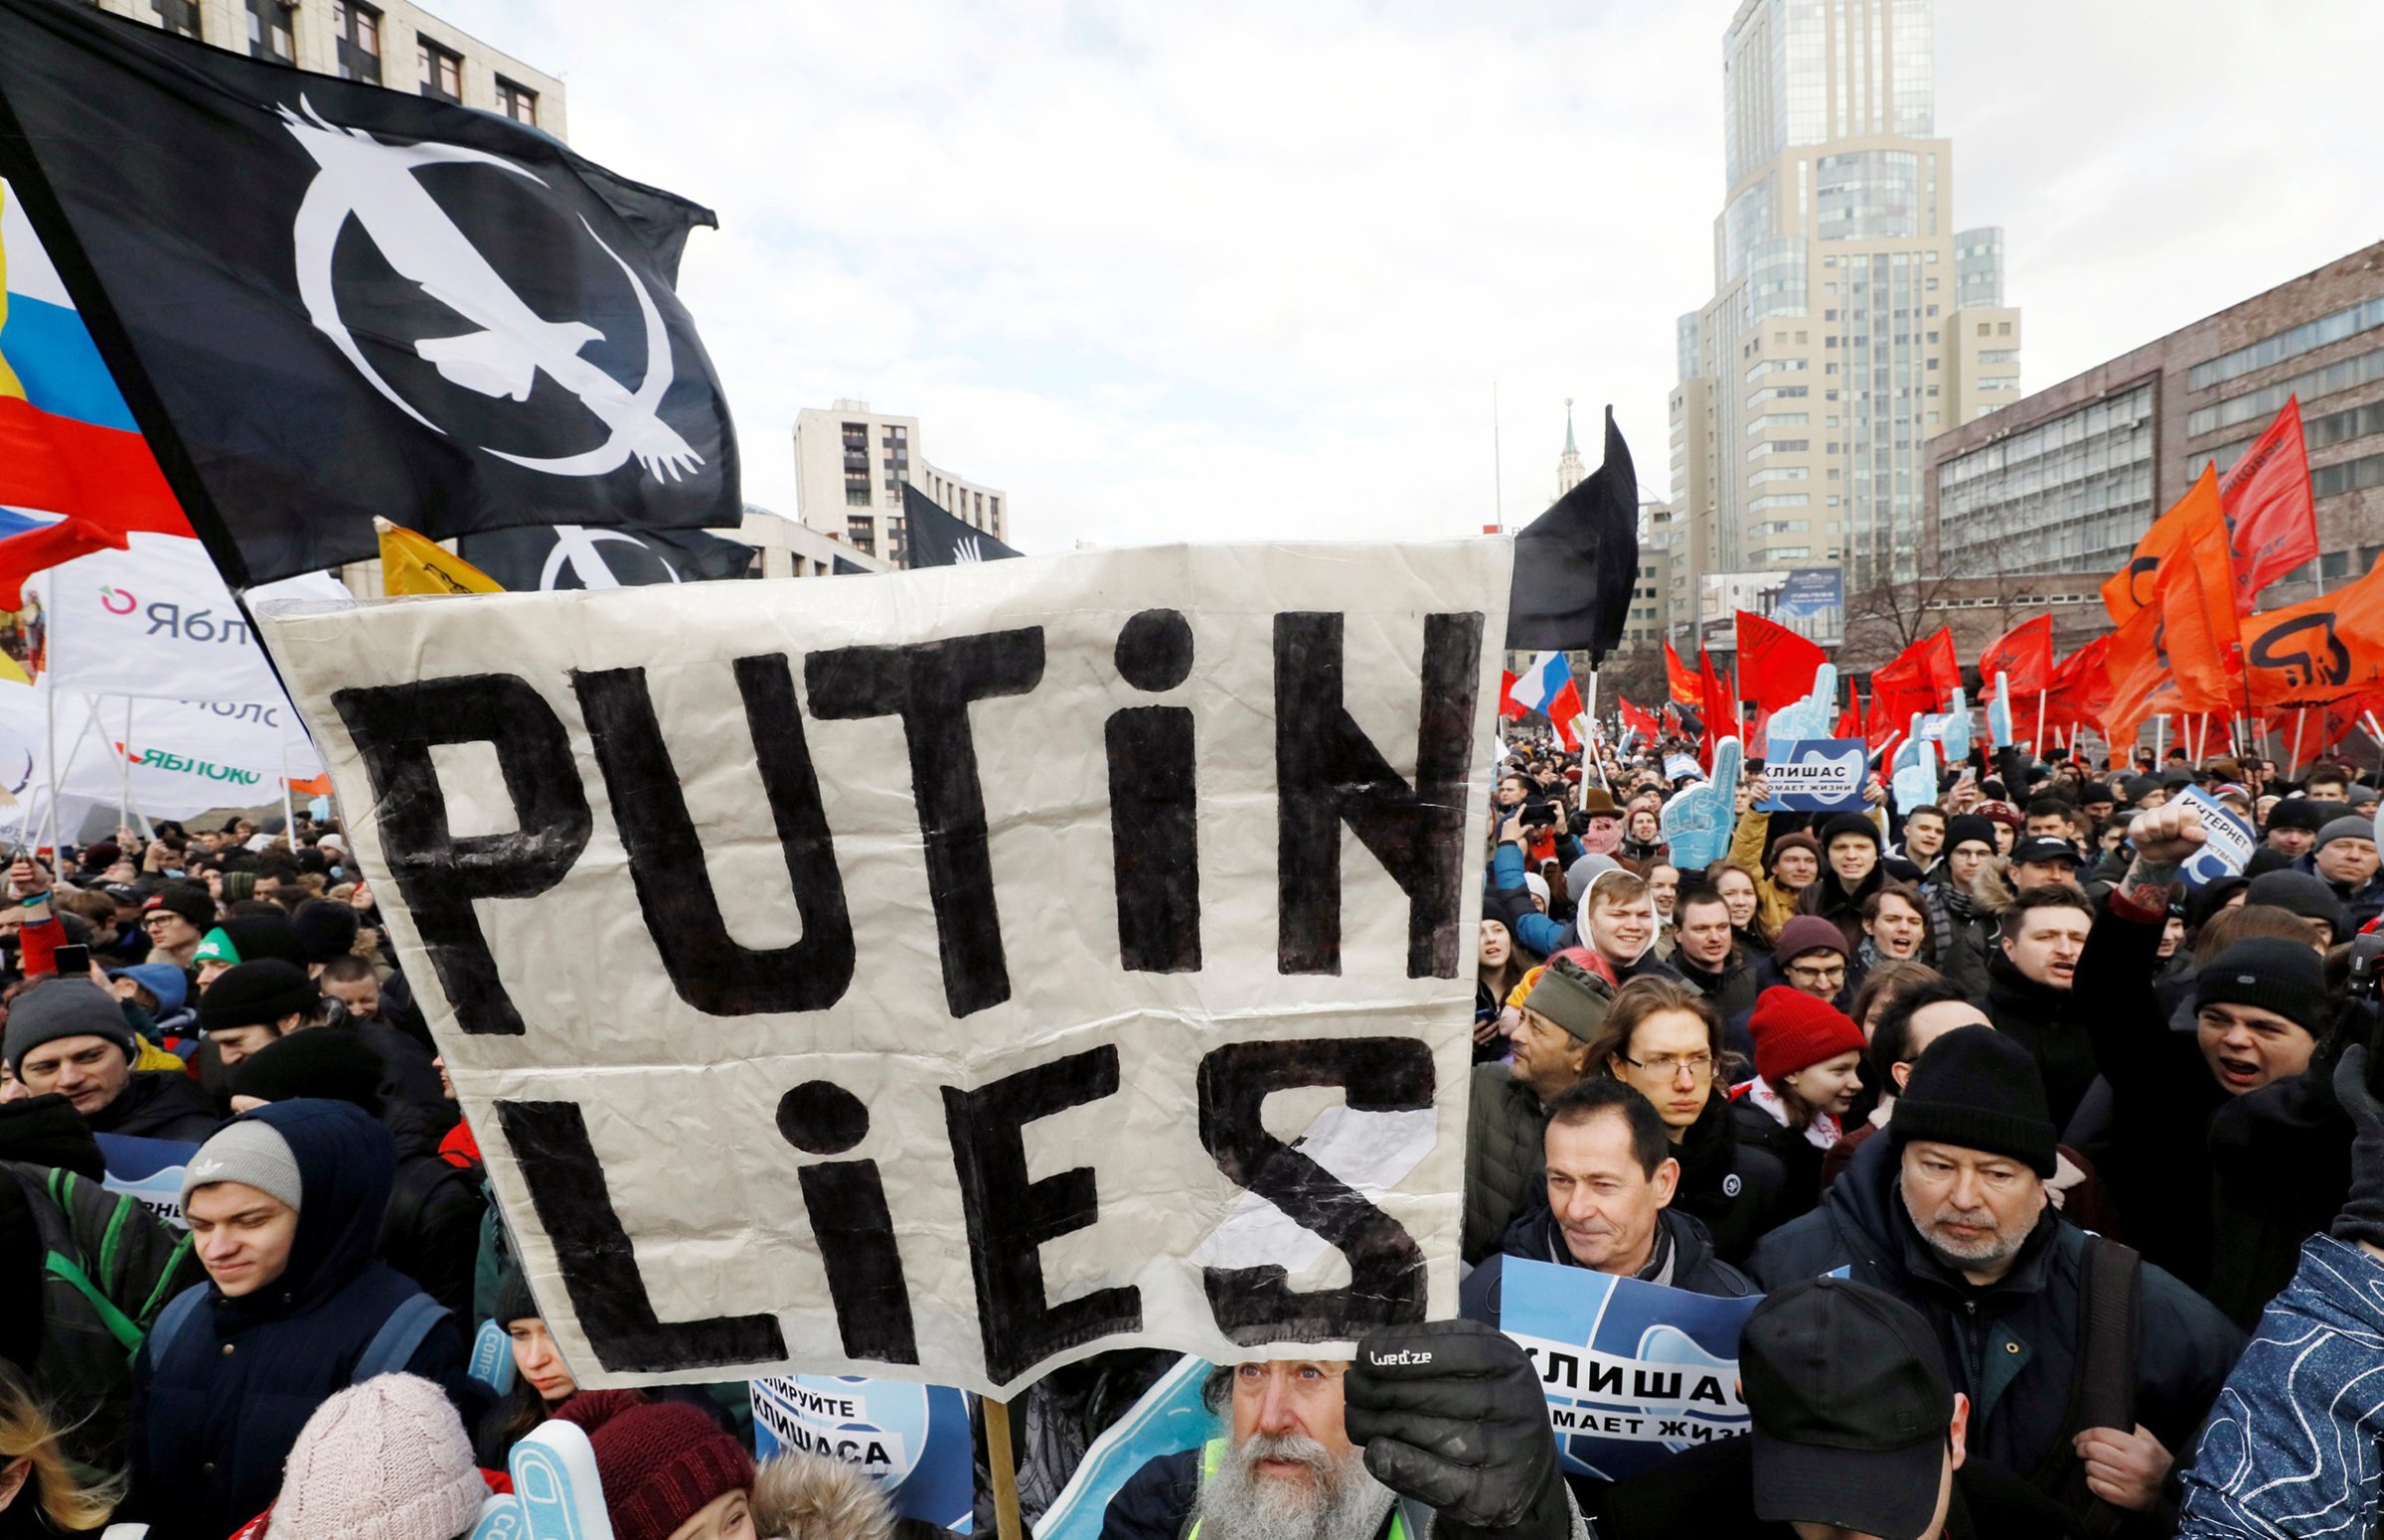 Russians protest against tightening state control over the internet in Moscow on March 10.